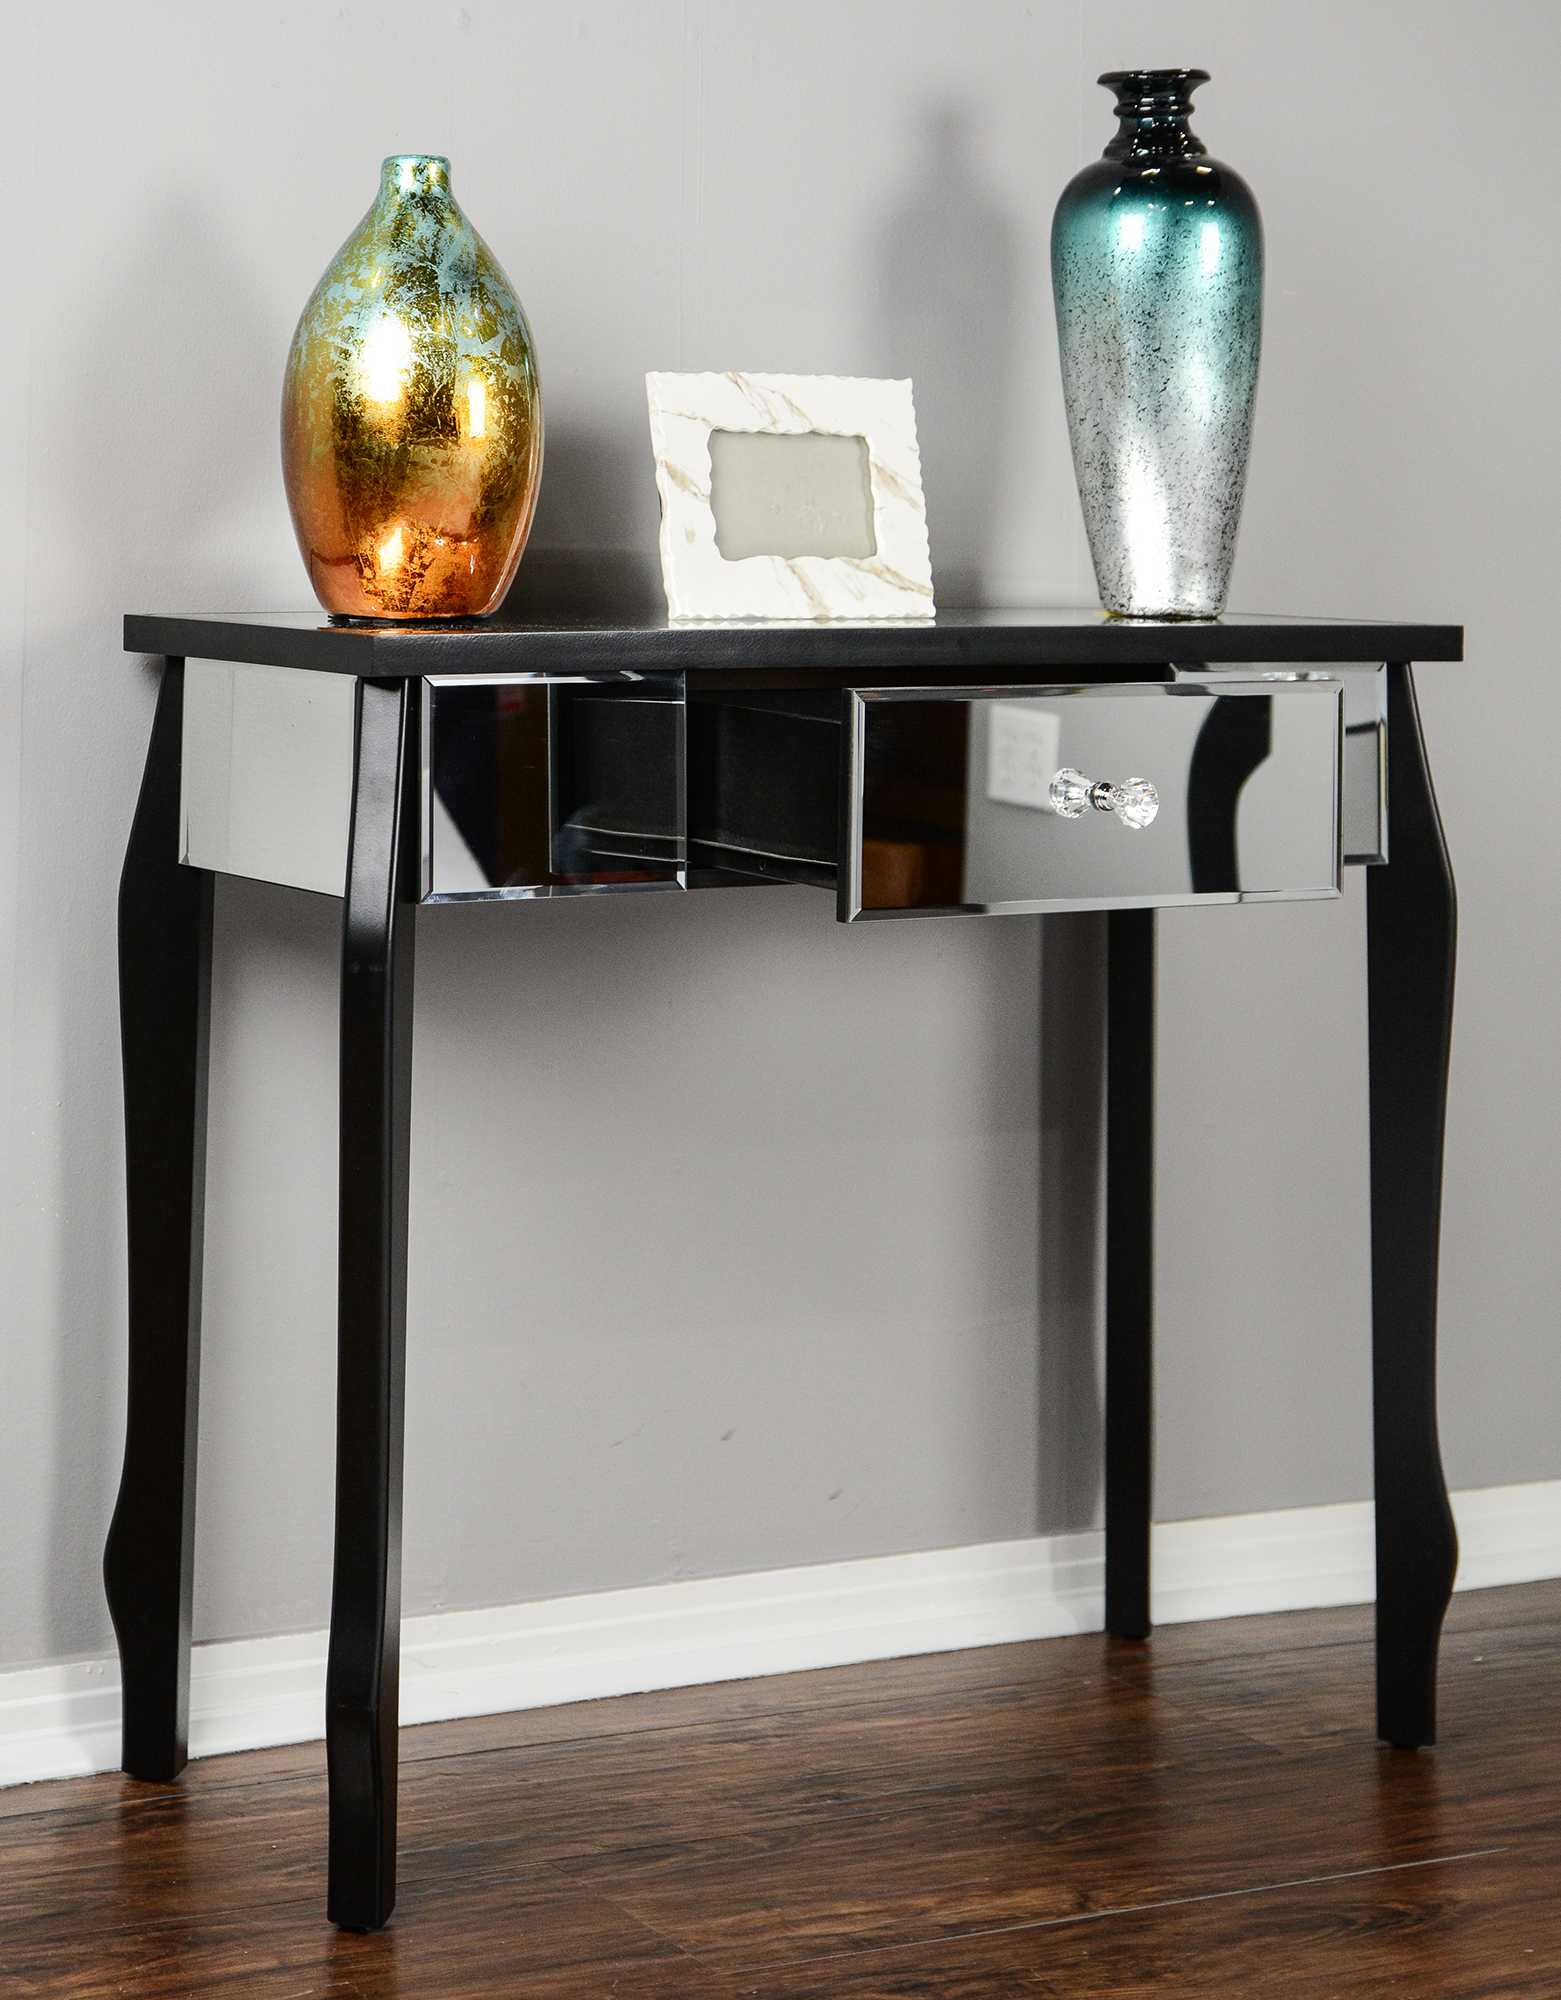 35.5" X 13" X 31" Black MDF Wood Mirrored Glass Console Table with Mirrored Glass Inserts and a Drawer